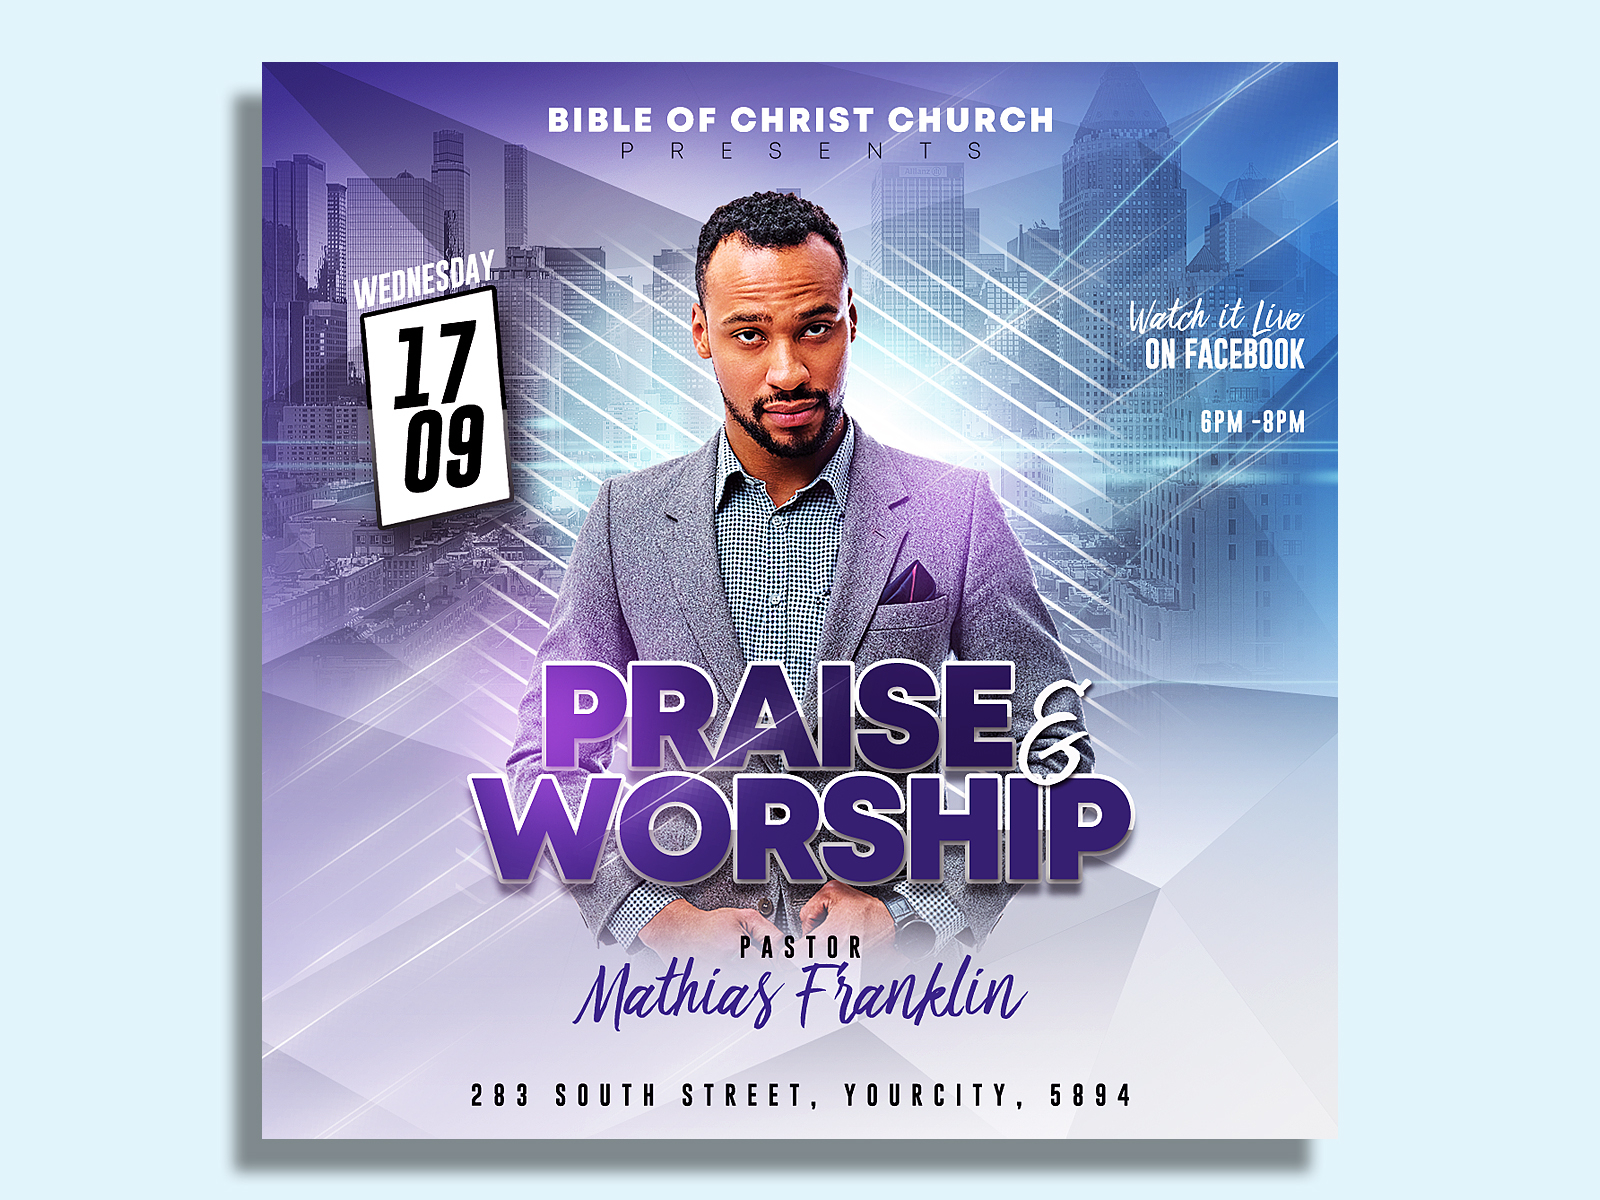 Church Flyer Template by Hotpin on Dribbble With Regard To Free Church Flyer Templates Download